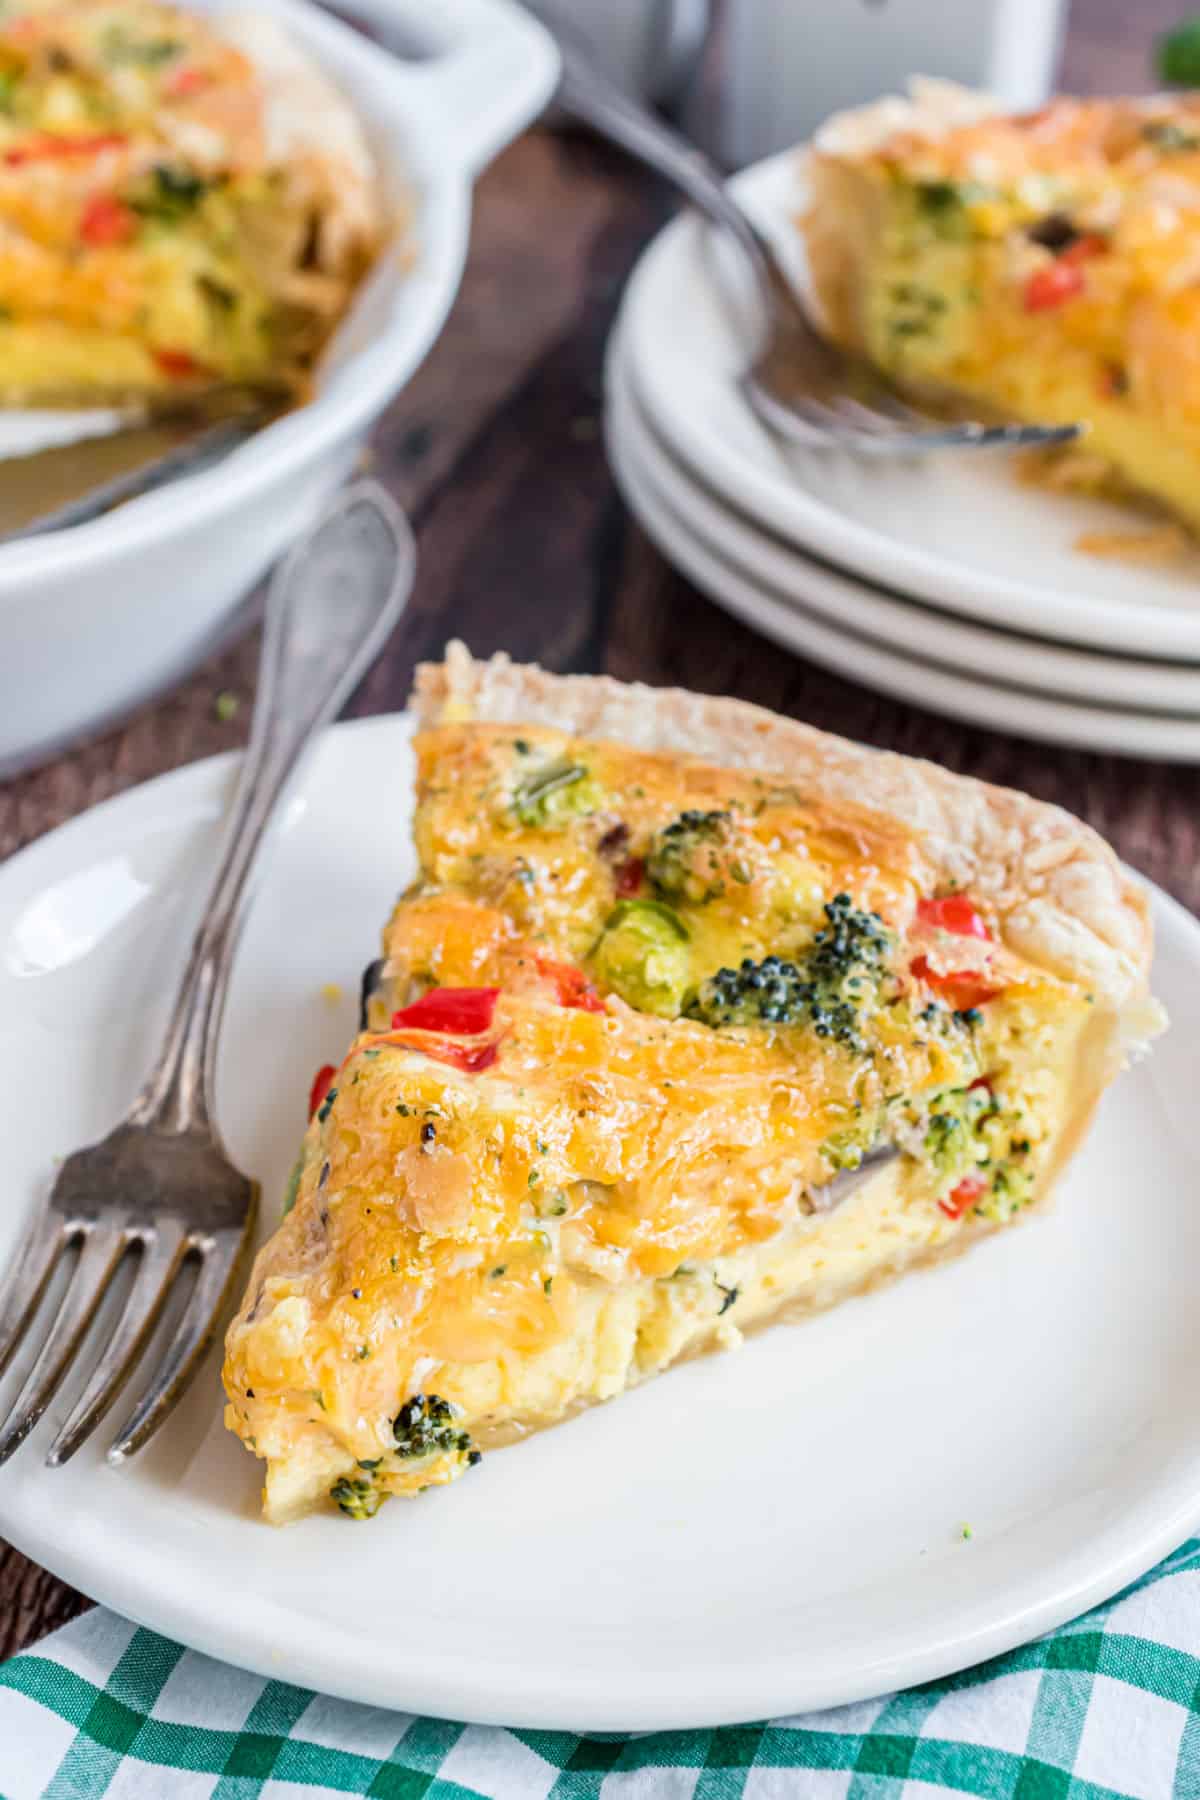 Slice of vegetable quiche on white plate with fork.